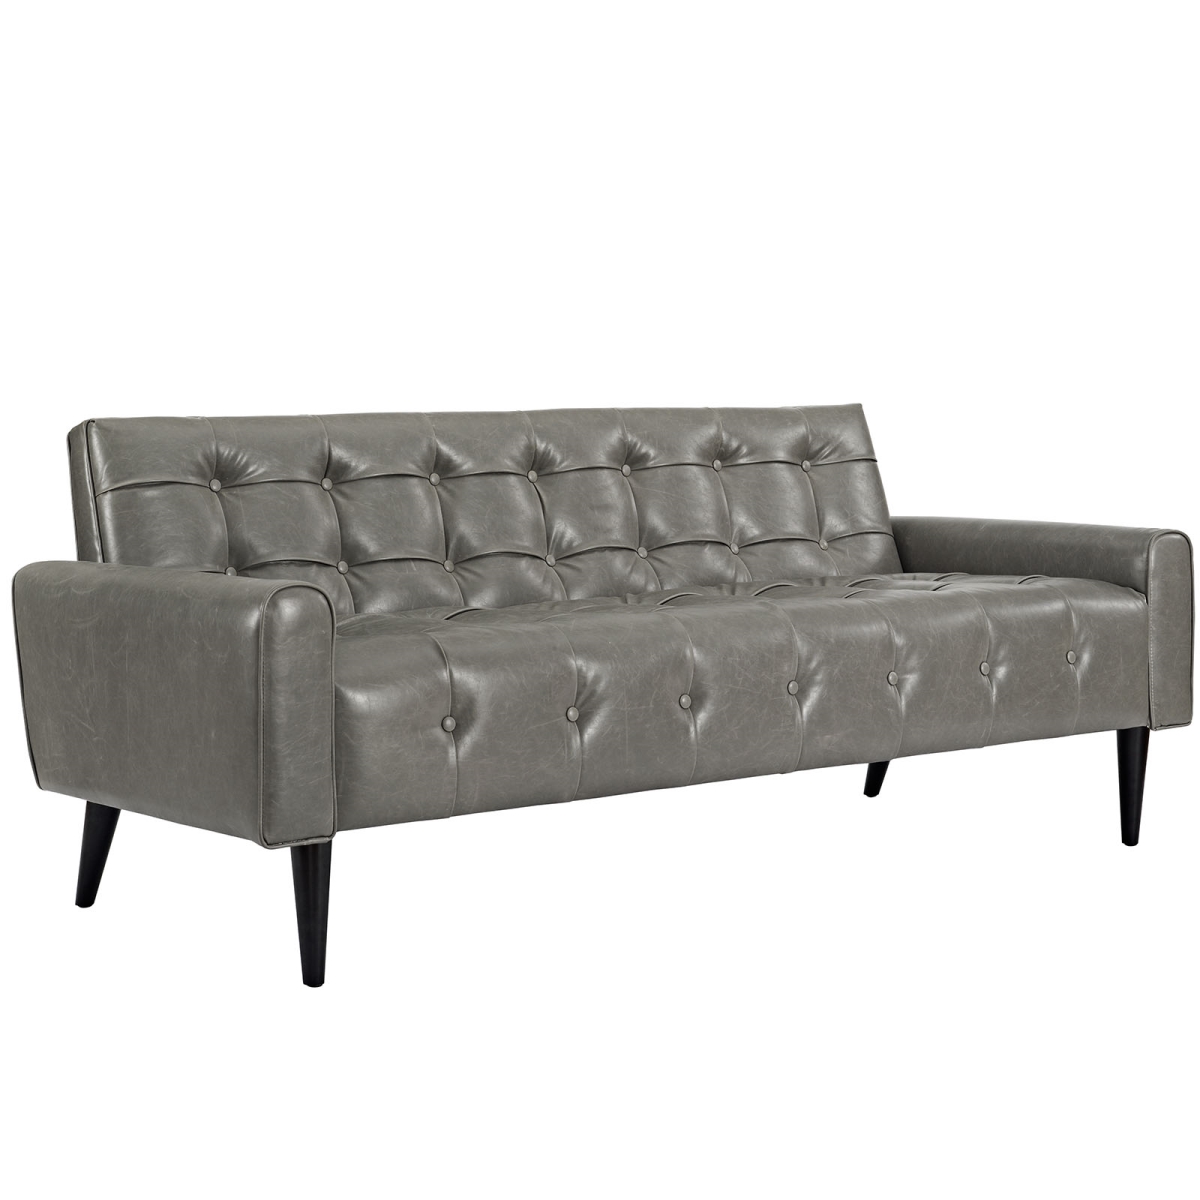 Modway Eei-2457-gry 29 H X 72.5w X 31.5 L In. Delve Upholstered Vinyl Sofa, Gray